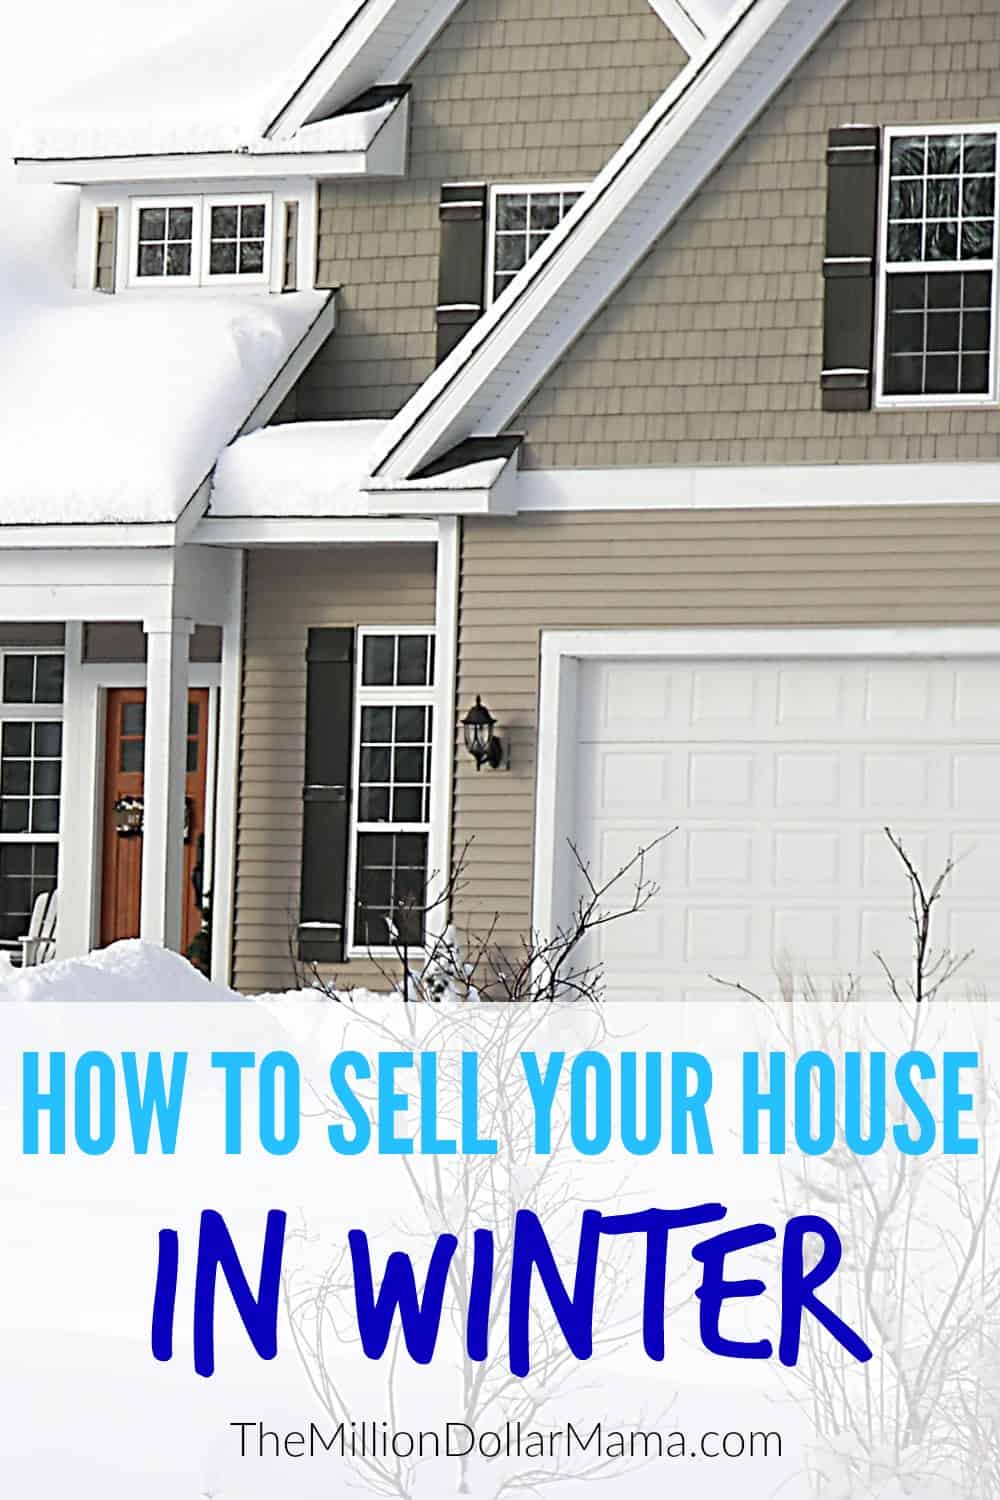 How to sell a house in winter - these winter home selling tips will help you embrace a notoriously difficult time of year and help get your house sold!